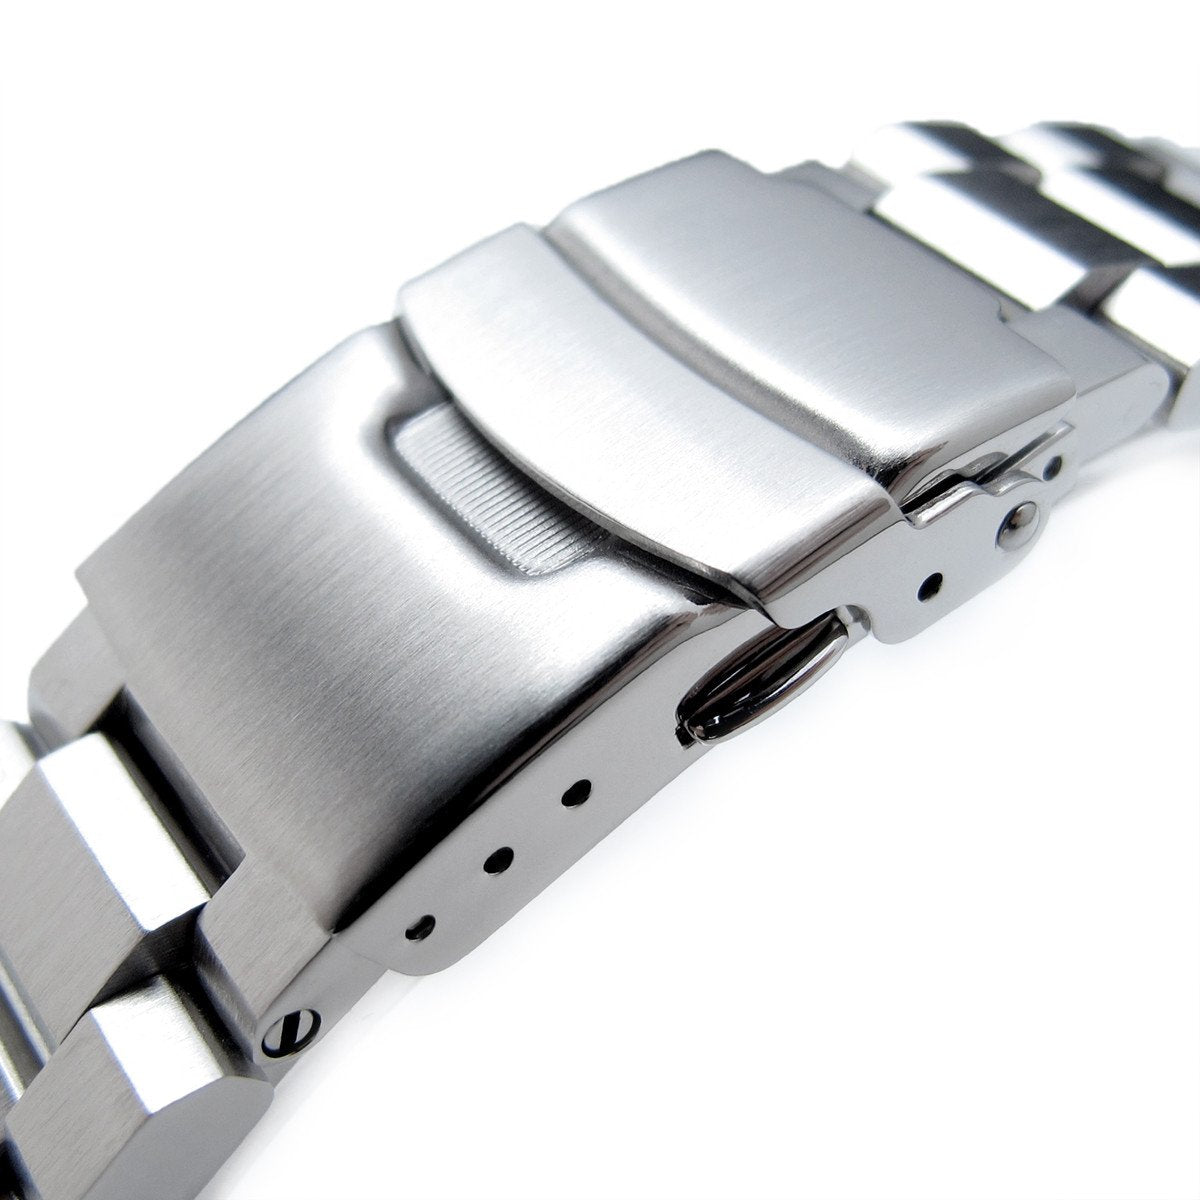 22mm Hexad 316L Stainless Steel Watch Band Straight End Lug Diver Clasp Brushed Strapcode Watch Bands